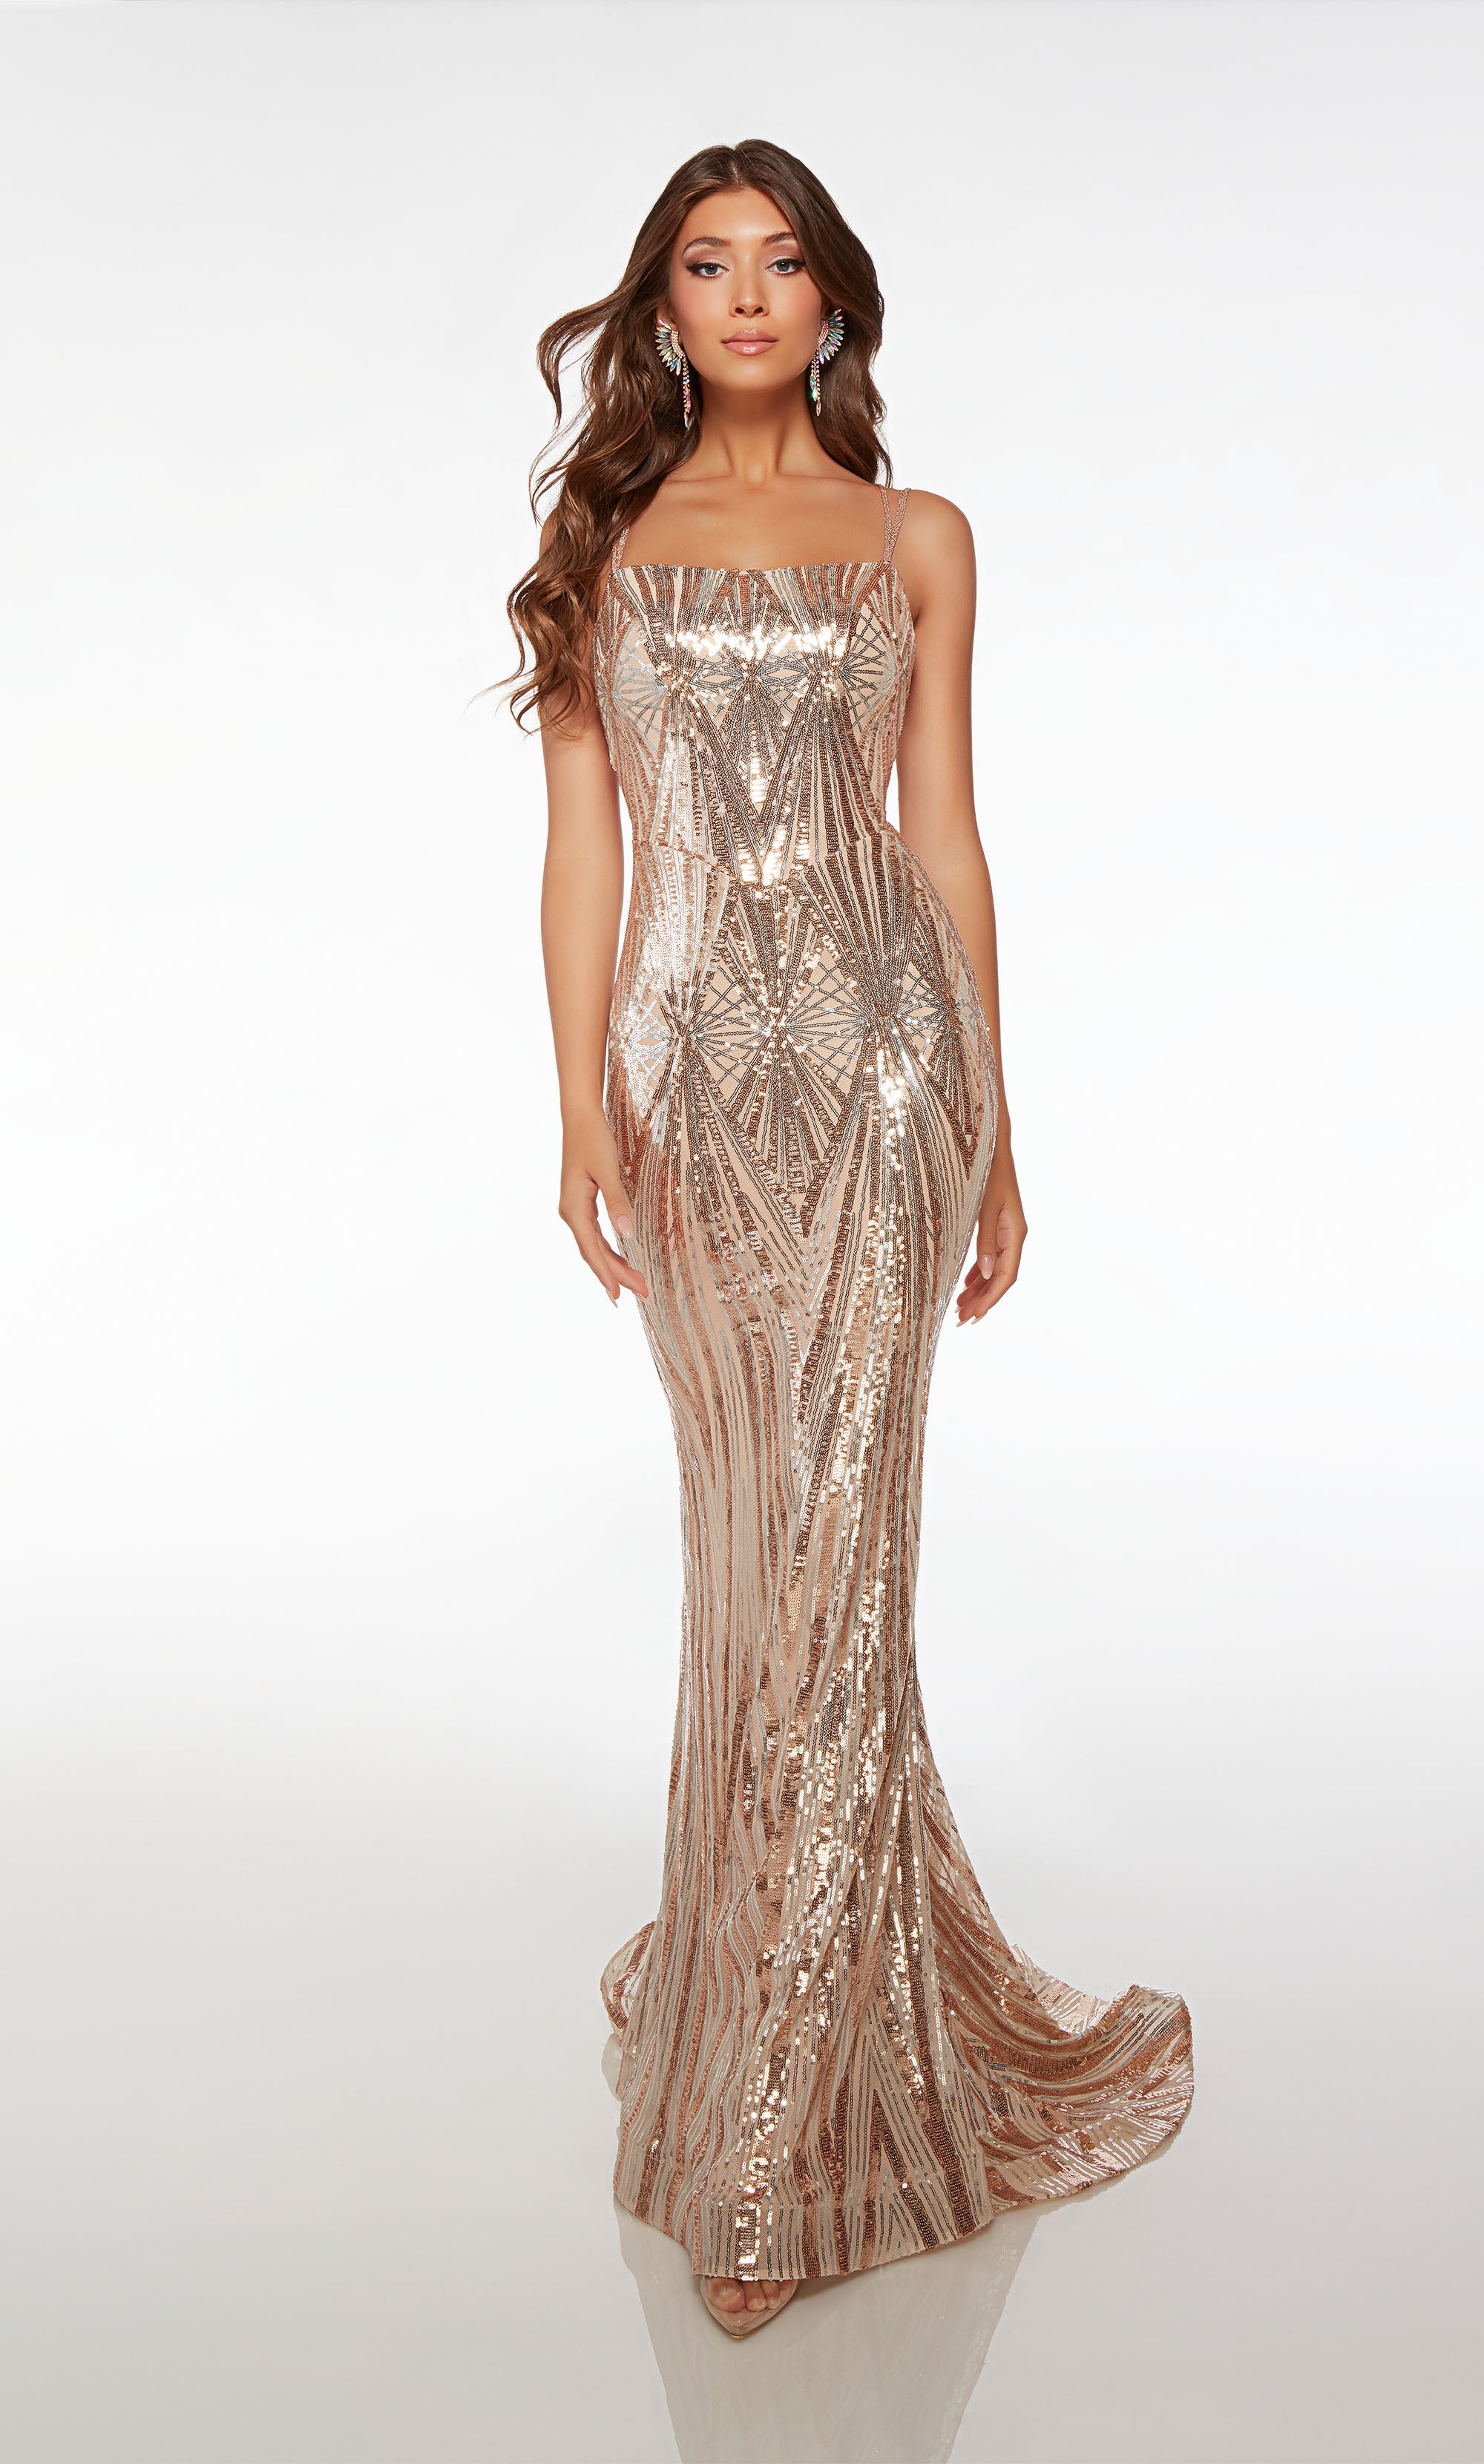 Alluring gold formal dress: mermaid silhouette, square neckline, dual spaghetti straps, strappy open back, and an graceful train.